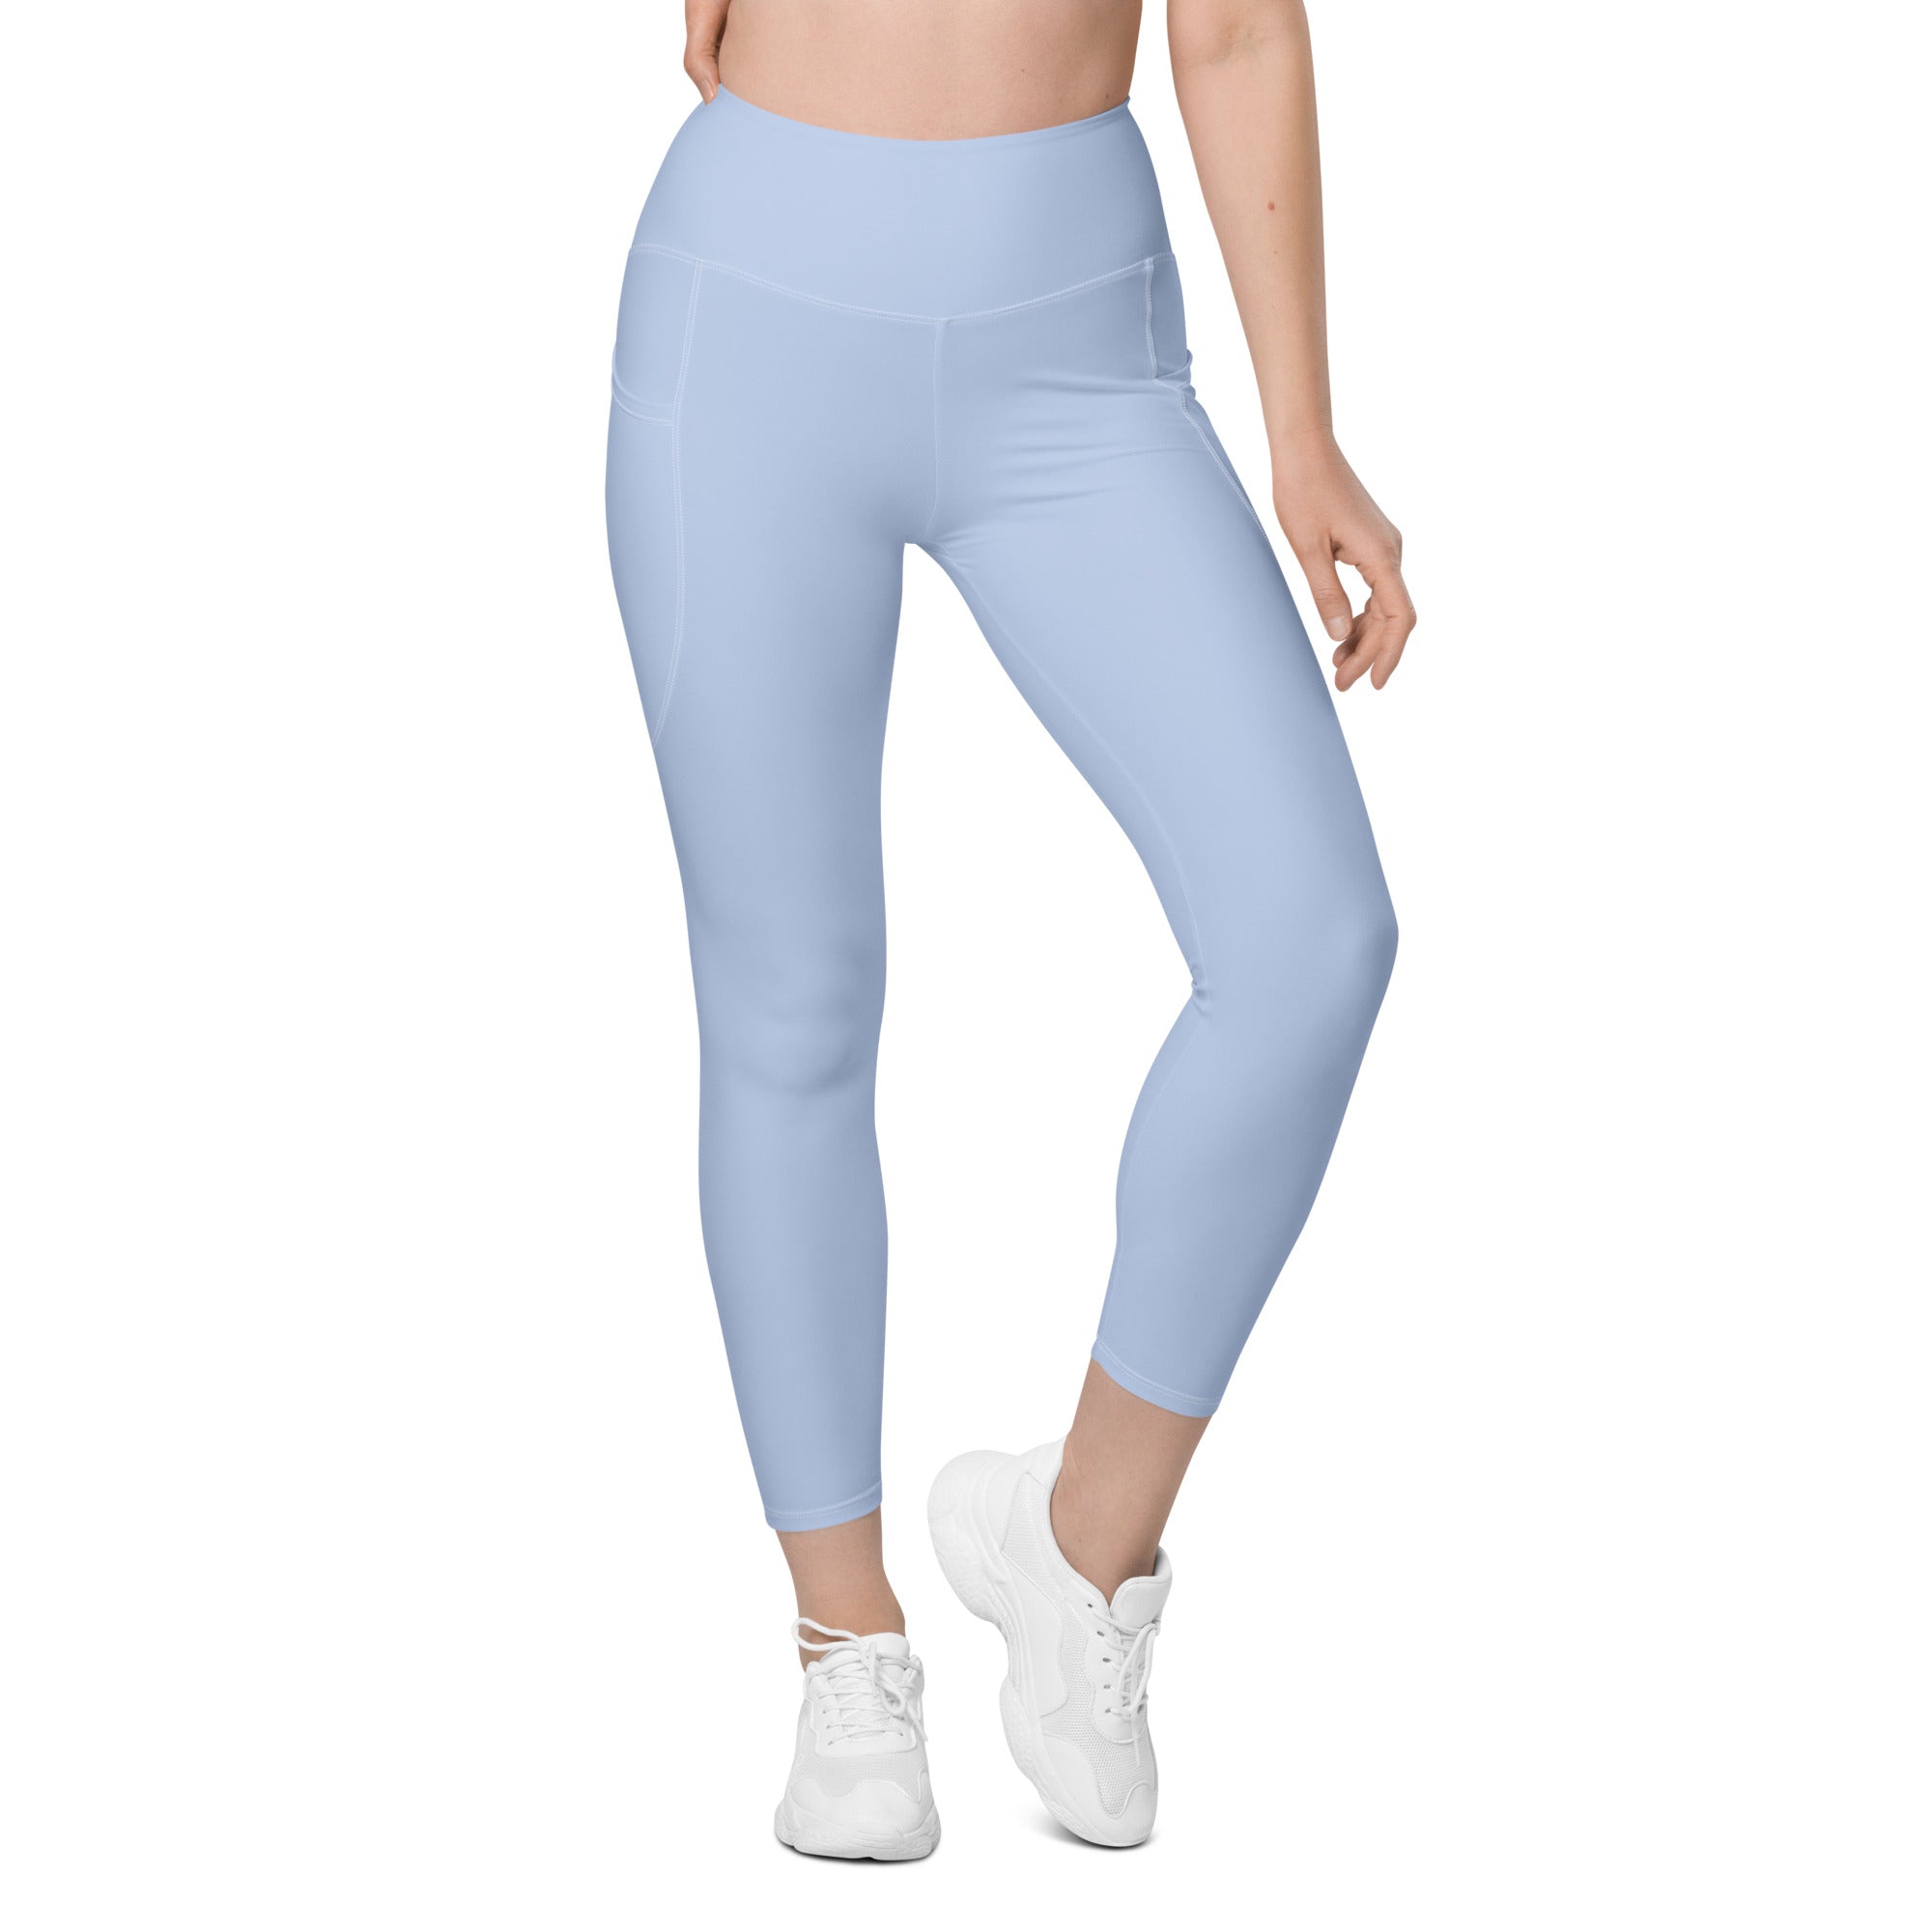 Baby Blue Leggings With Pockets